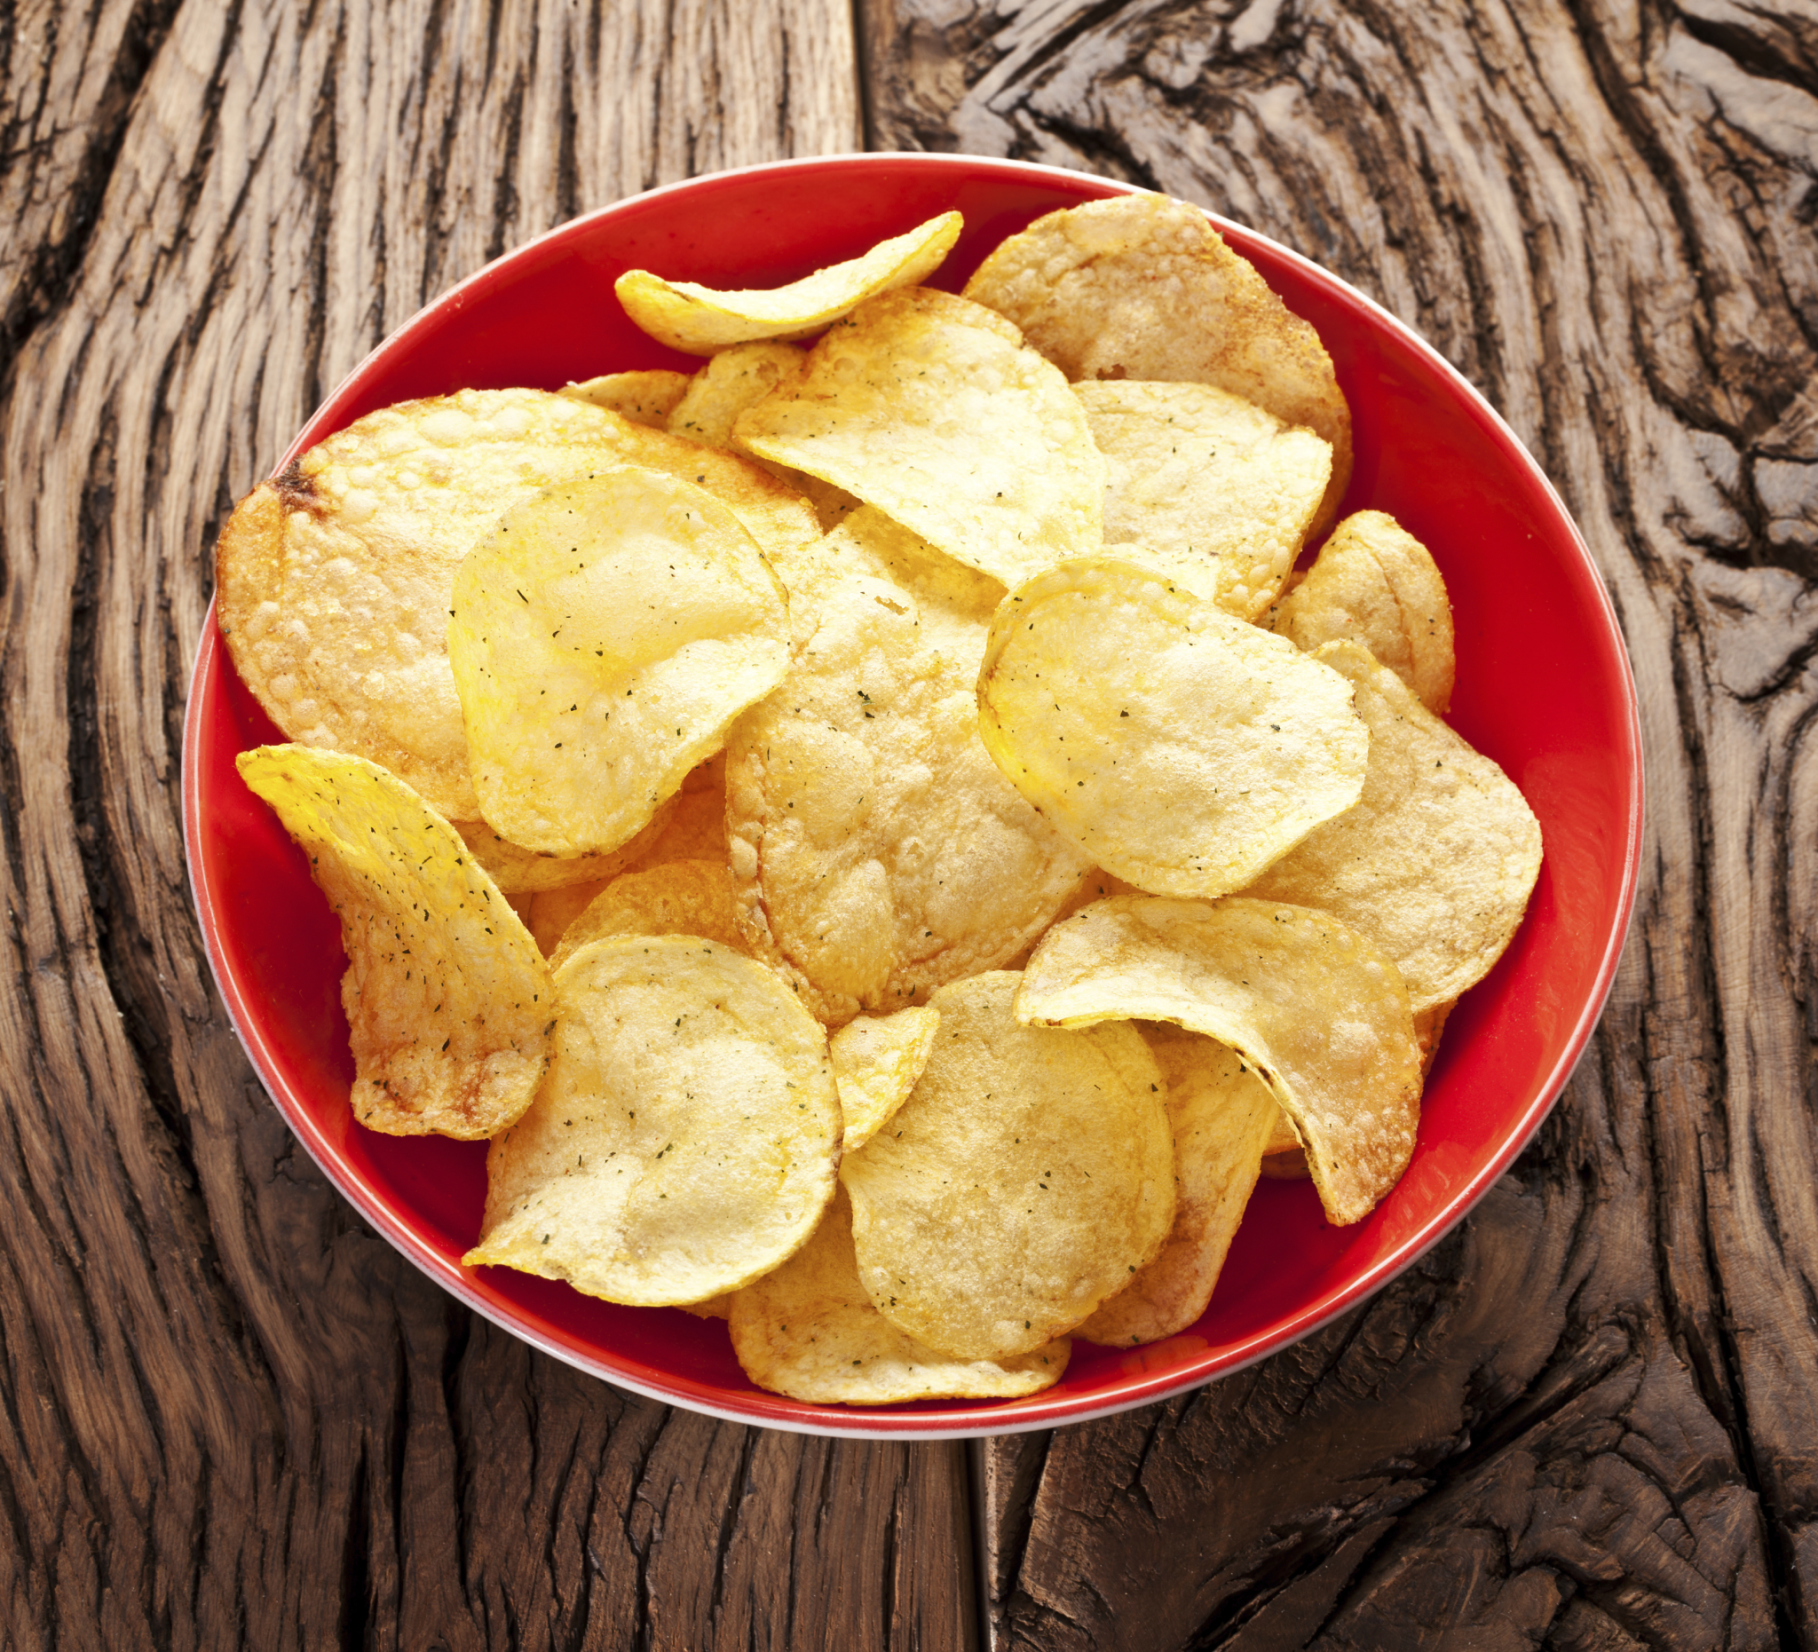 Potato chips in a bowl on old wooden table.